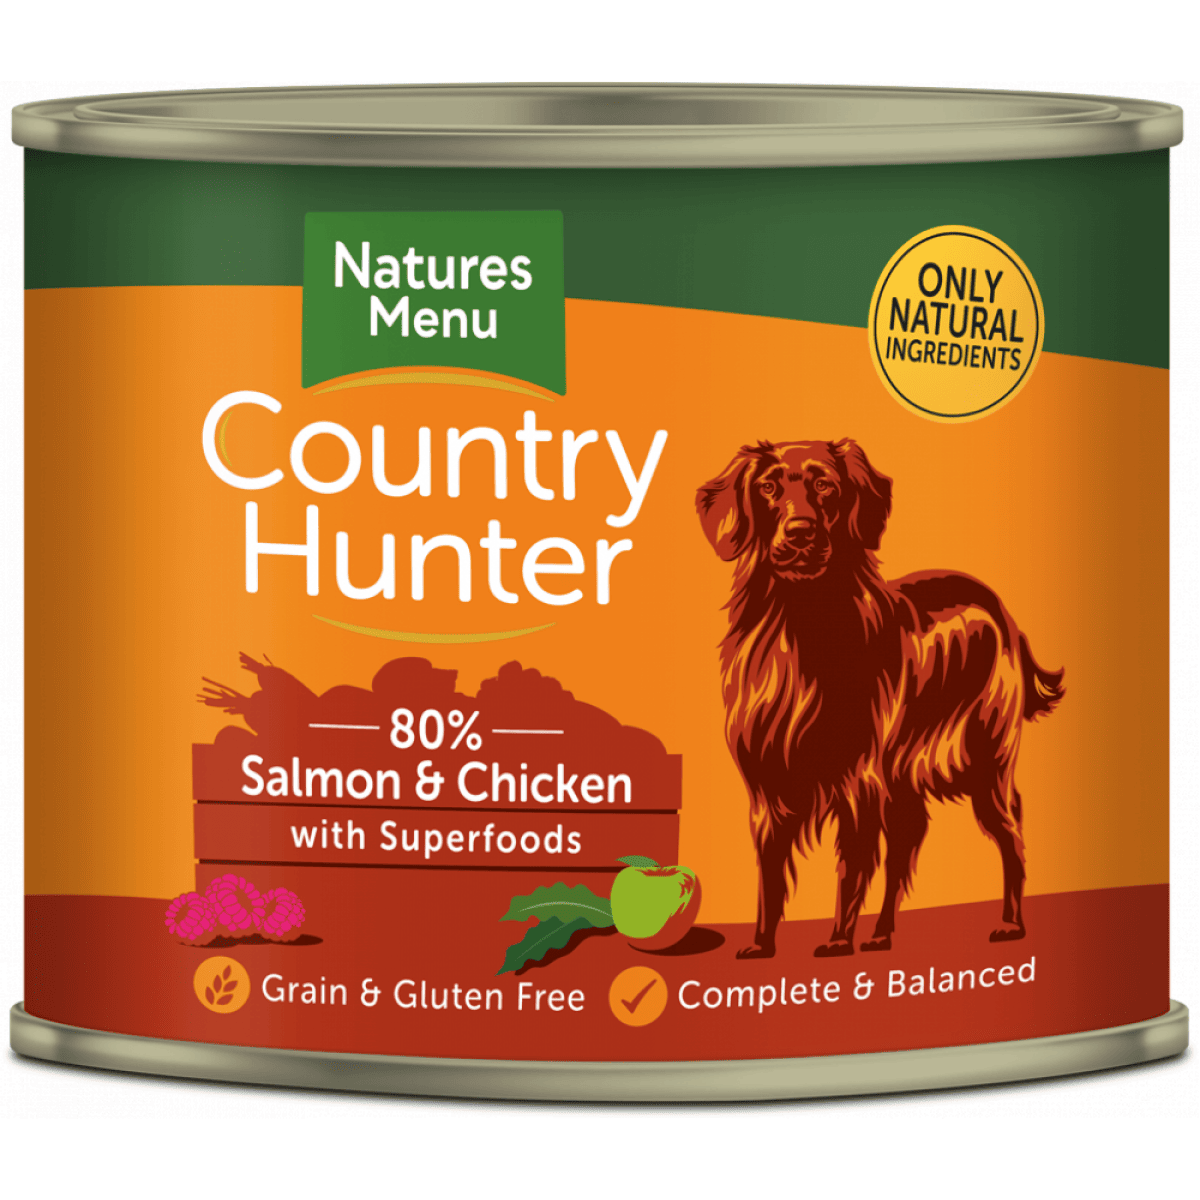 Country Hunter 80% Salmon & Chicken 600g – Pawfect Supplies Ltd Product Image